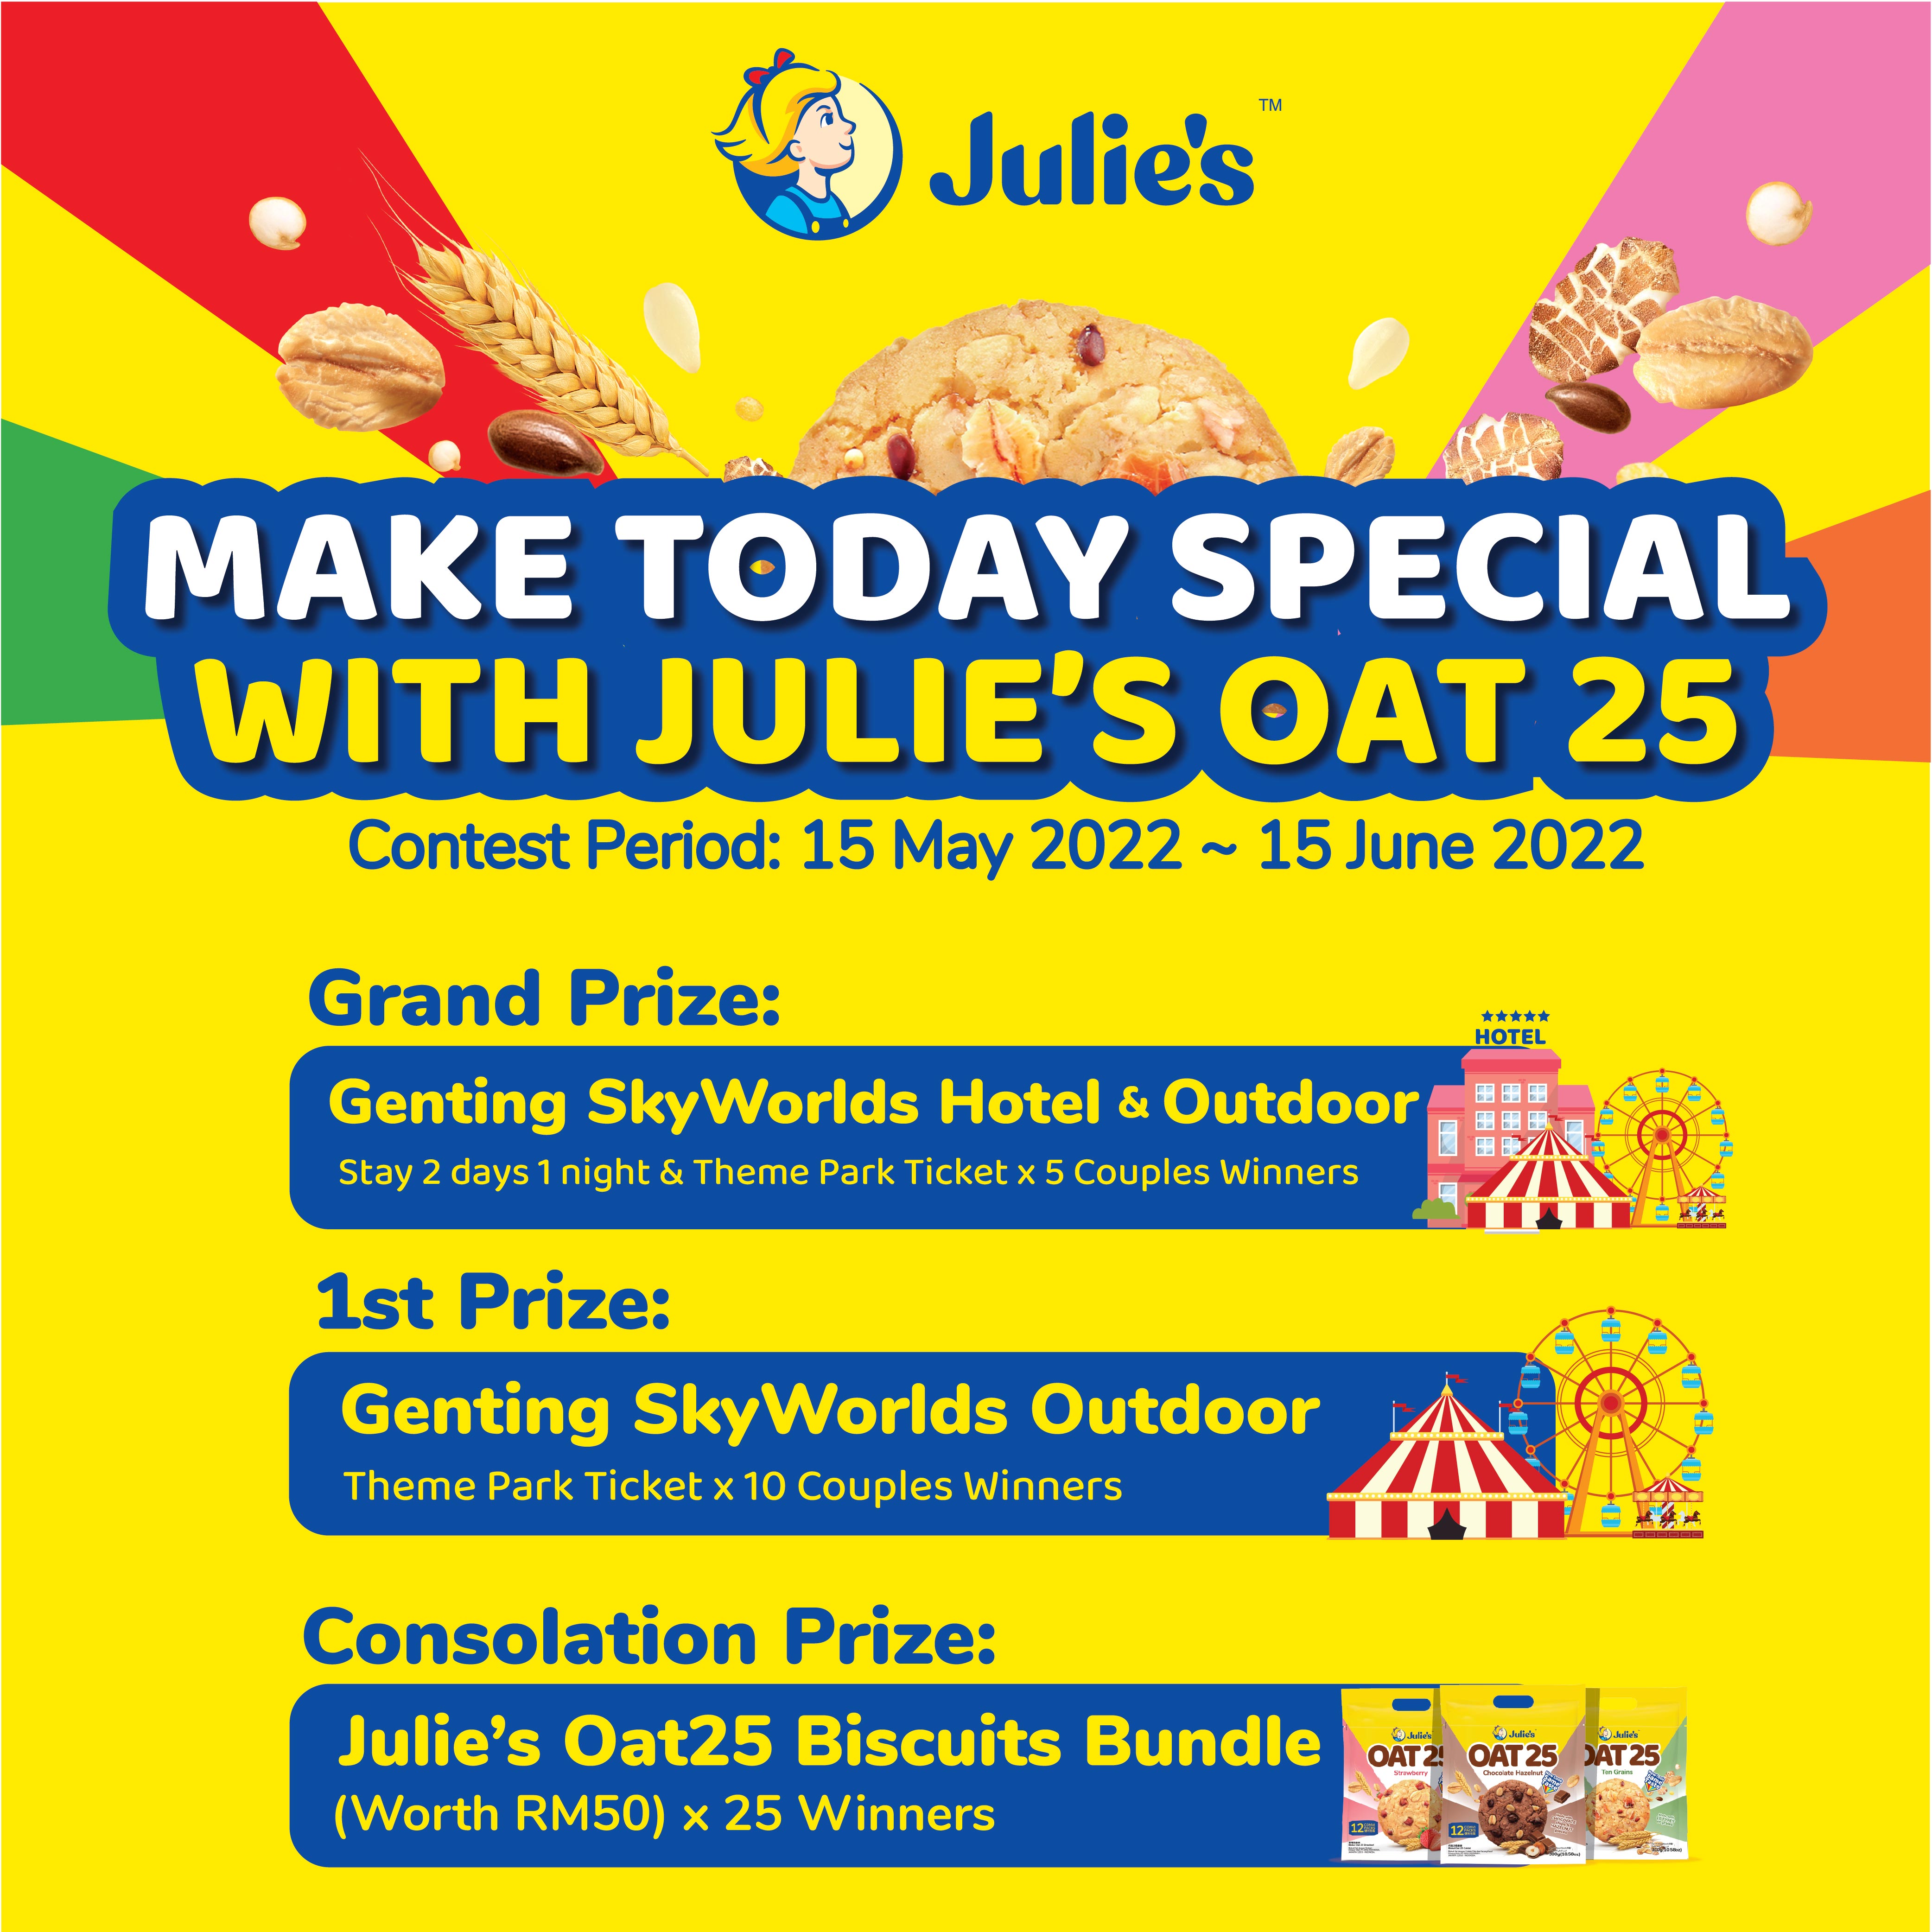 Julie's Oat25 Chocolate Biscuit 300g x 4 packs